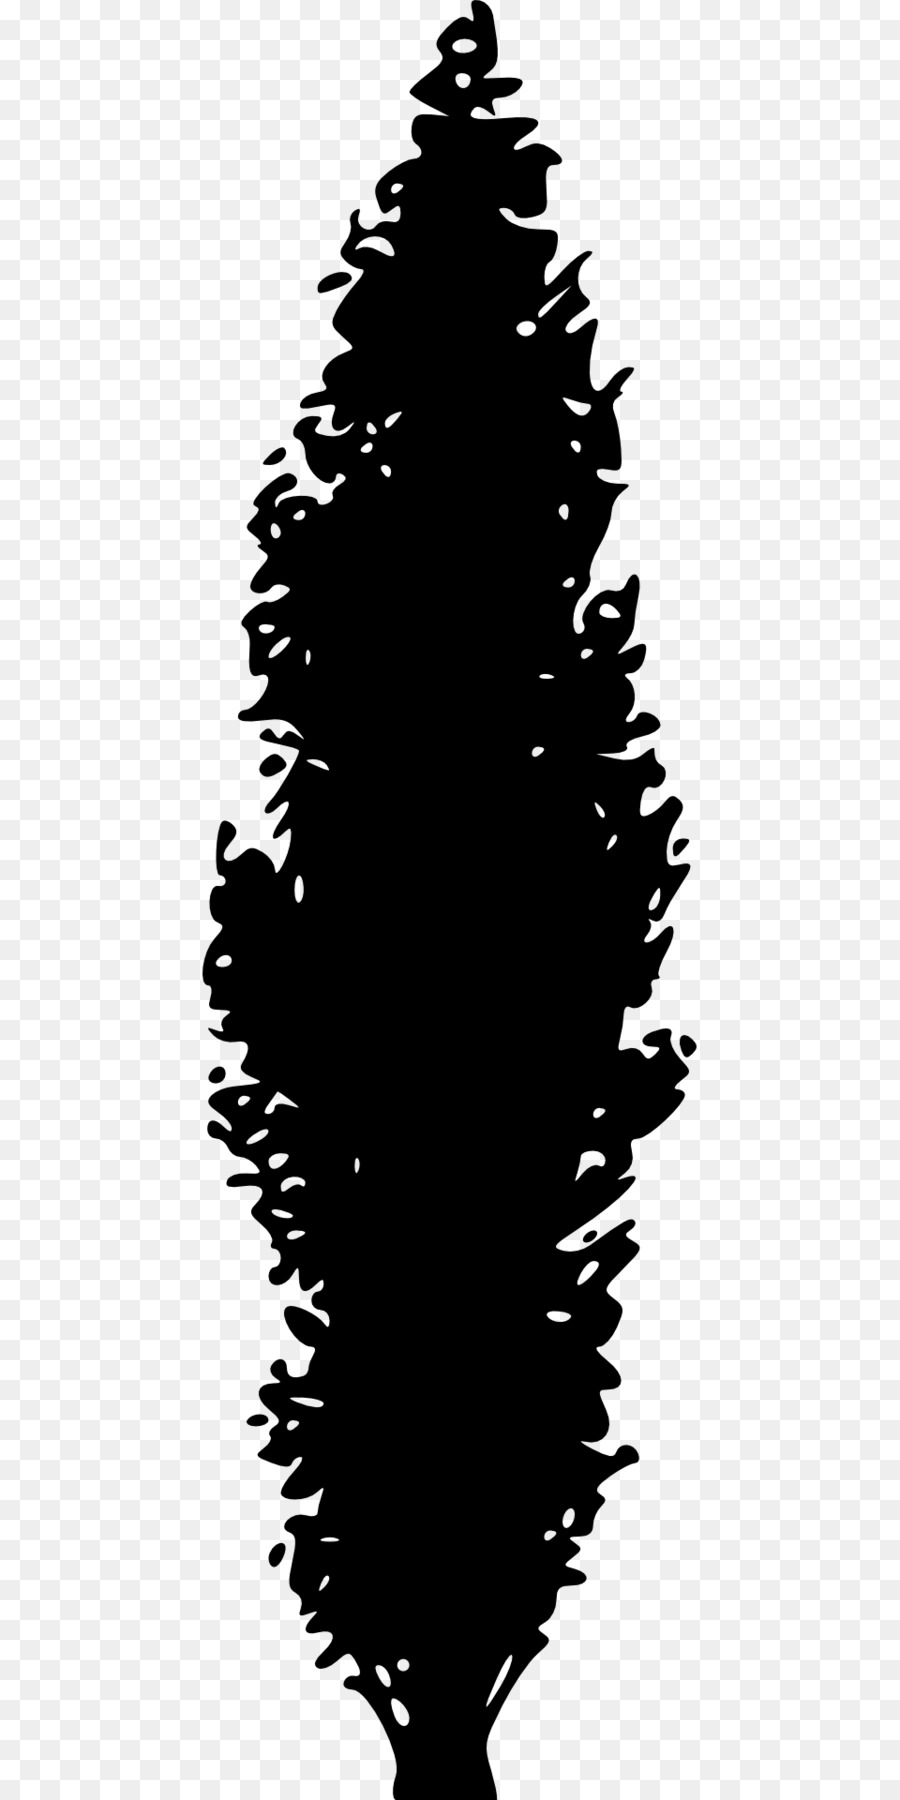 Pine Tree Clip art - tree silhouette png download - 960*1920 - Free Transparent Pine png Download.